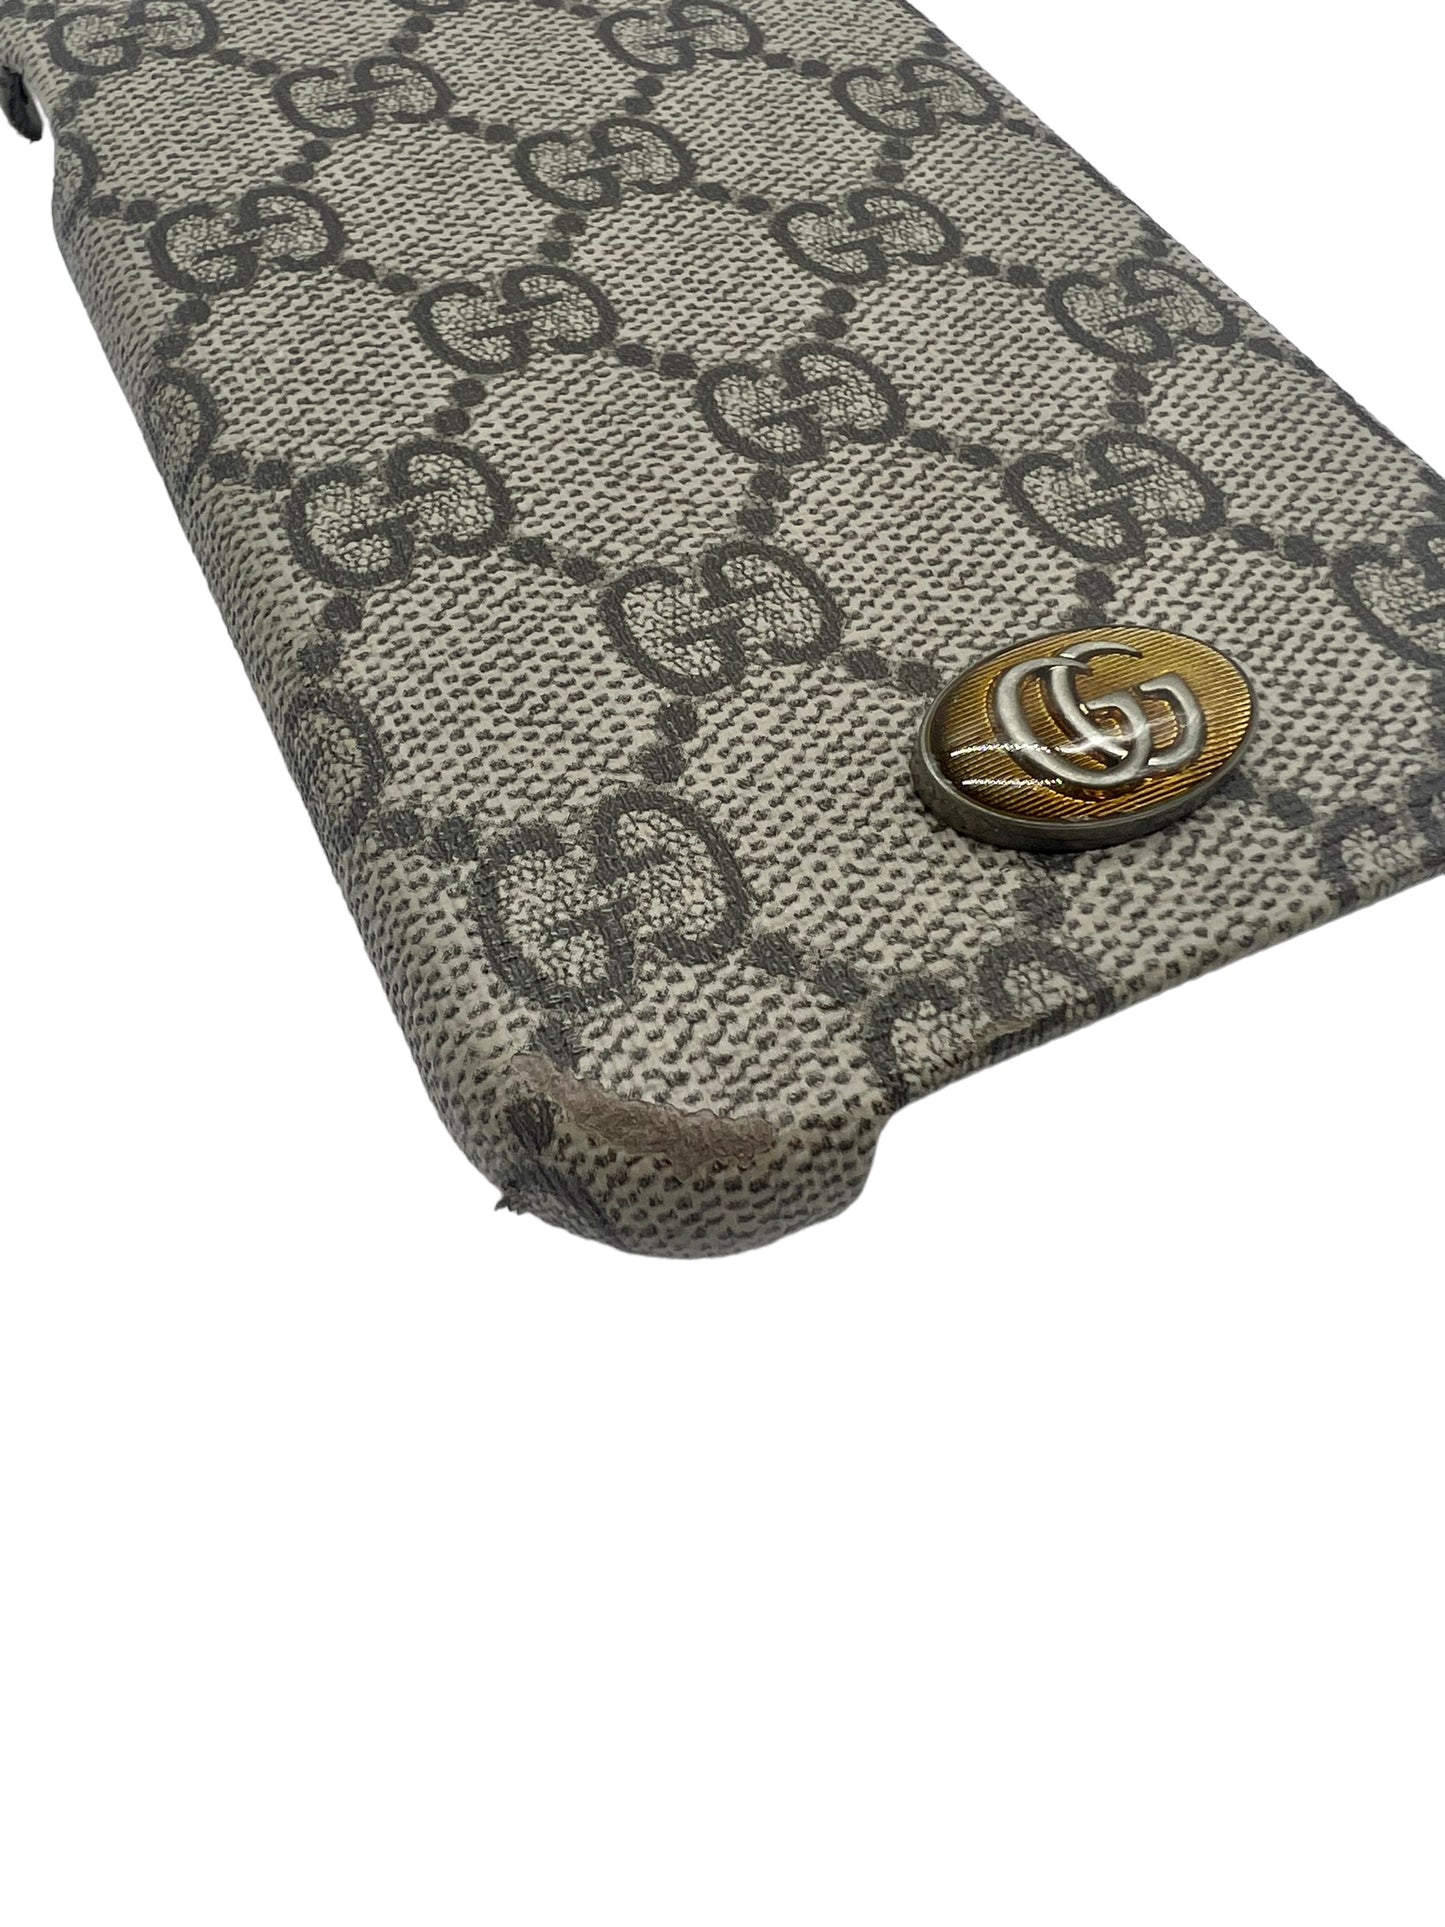 Gucci GG Ophidia iPhone 13 Pro Phone Case